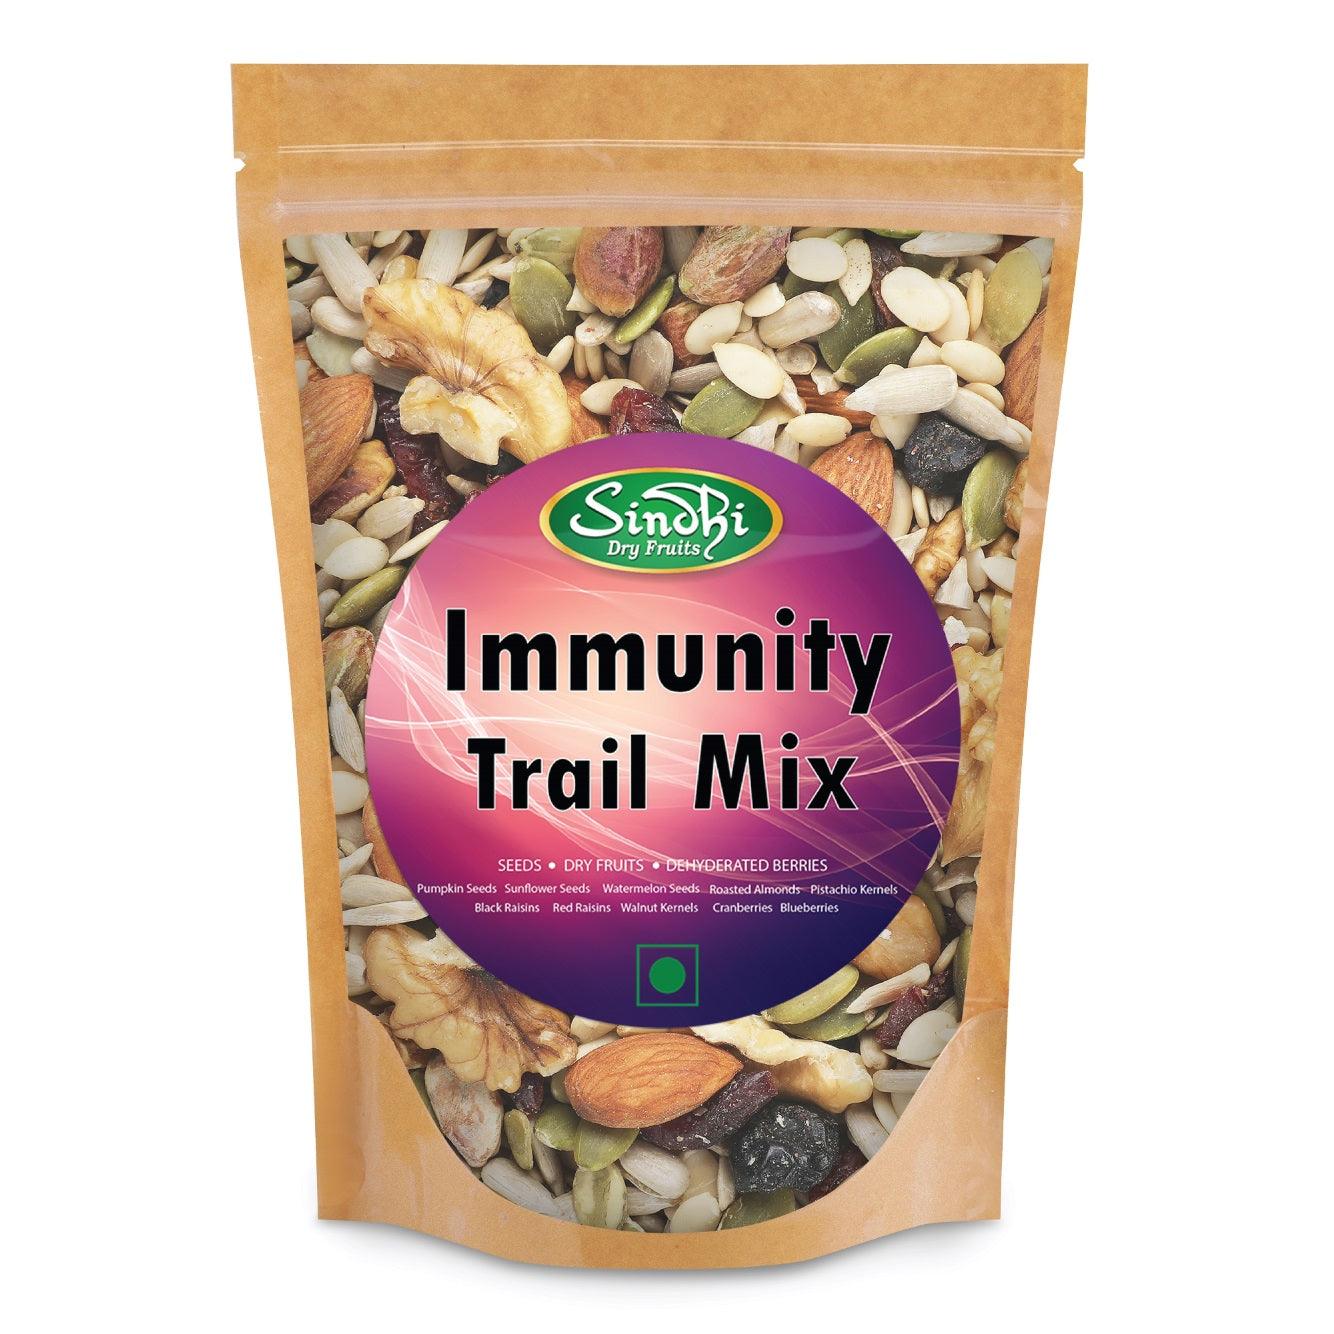 Healthy and tasty trail mix - Shop now